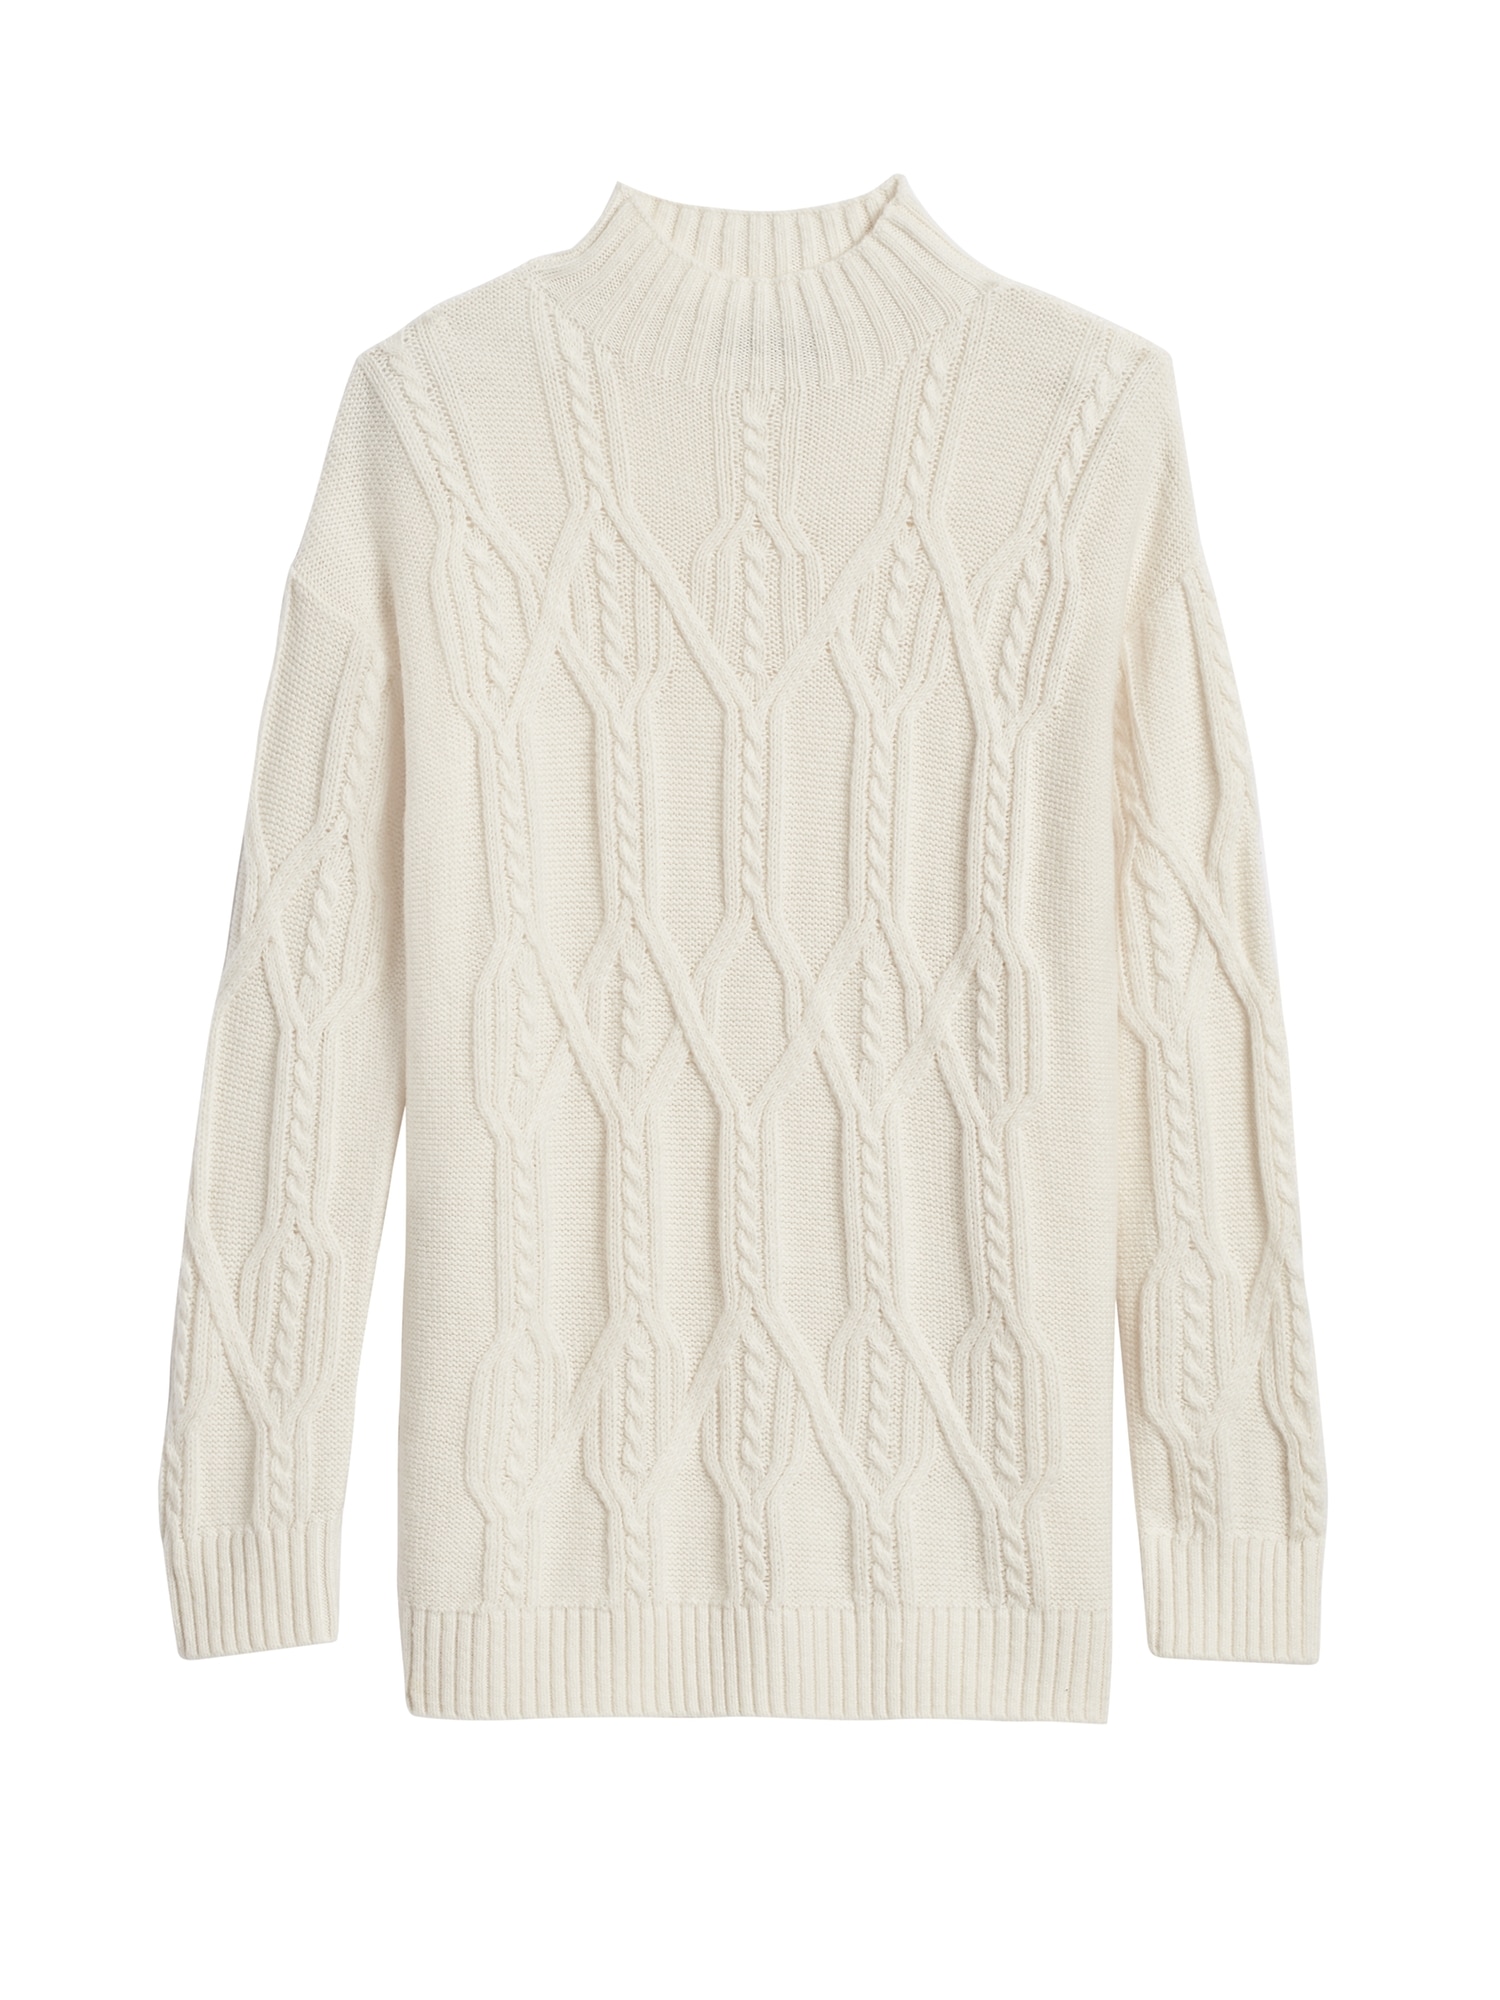 Petite Cable-Knit Sweater